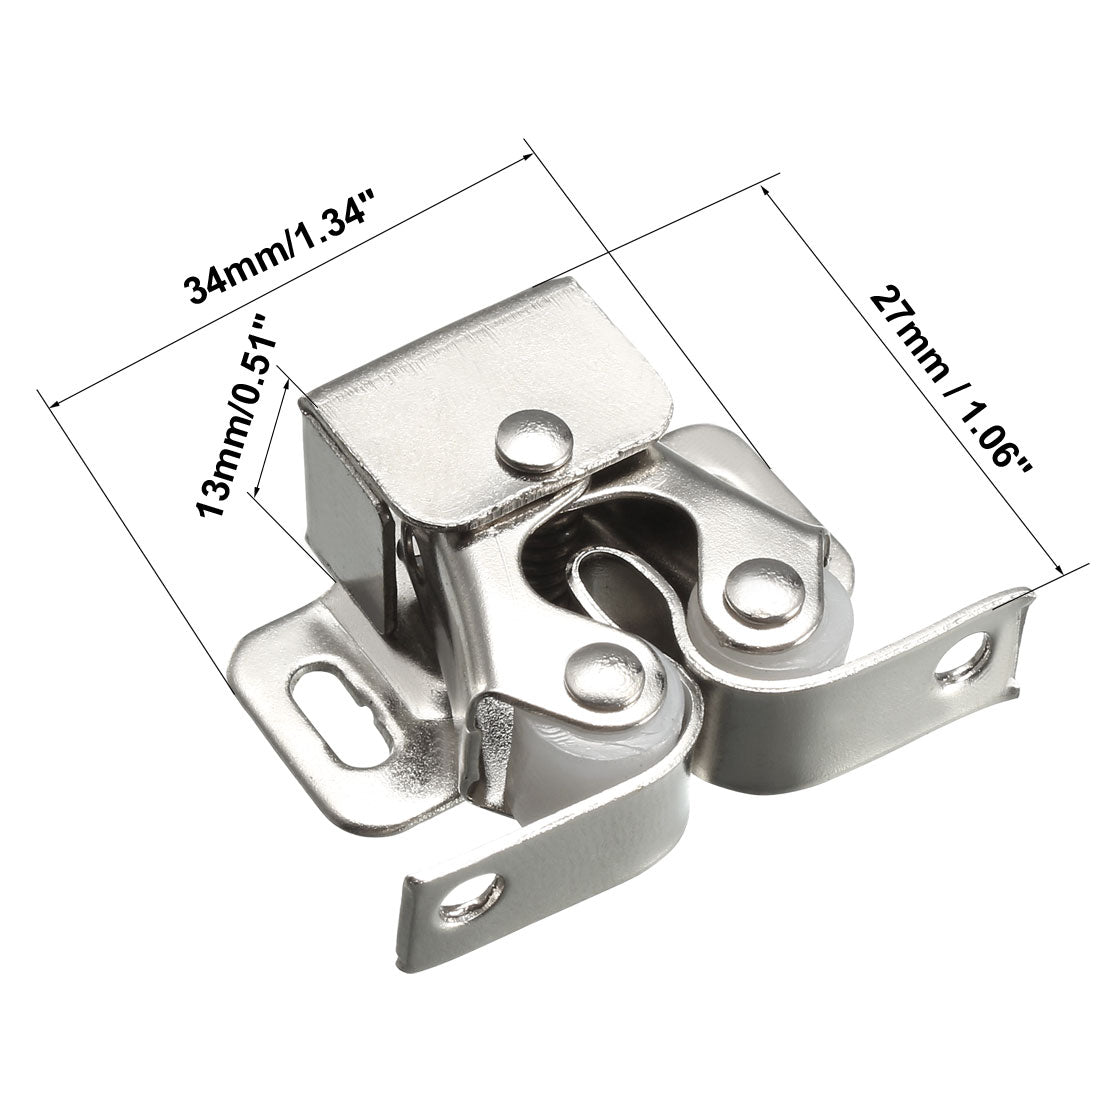 uxcell Uxcell Cabinet Door Double Roller Catch Ball Latch with Prong Hardware, Silver 5pcs